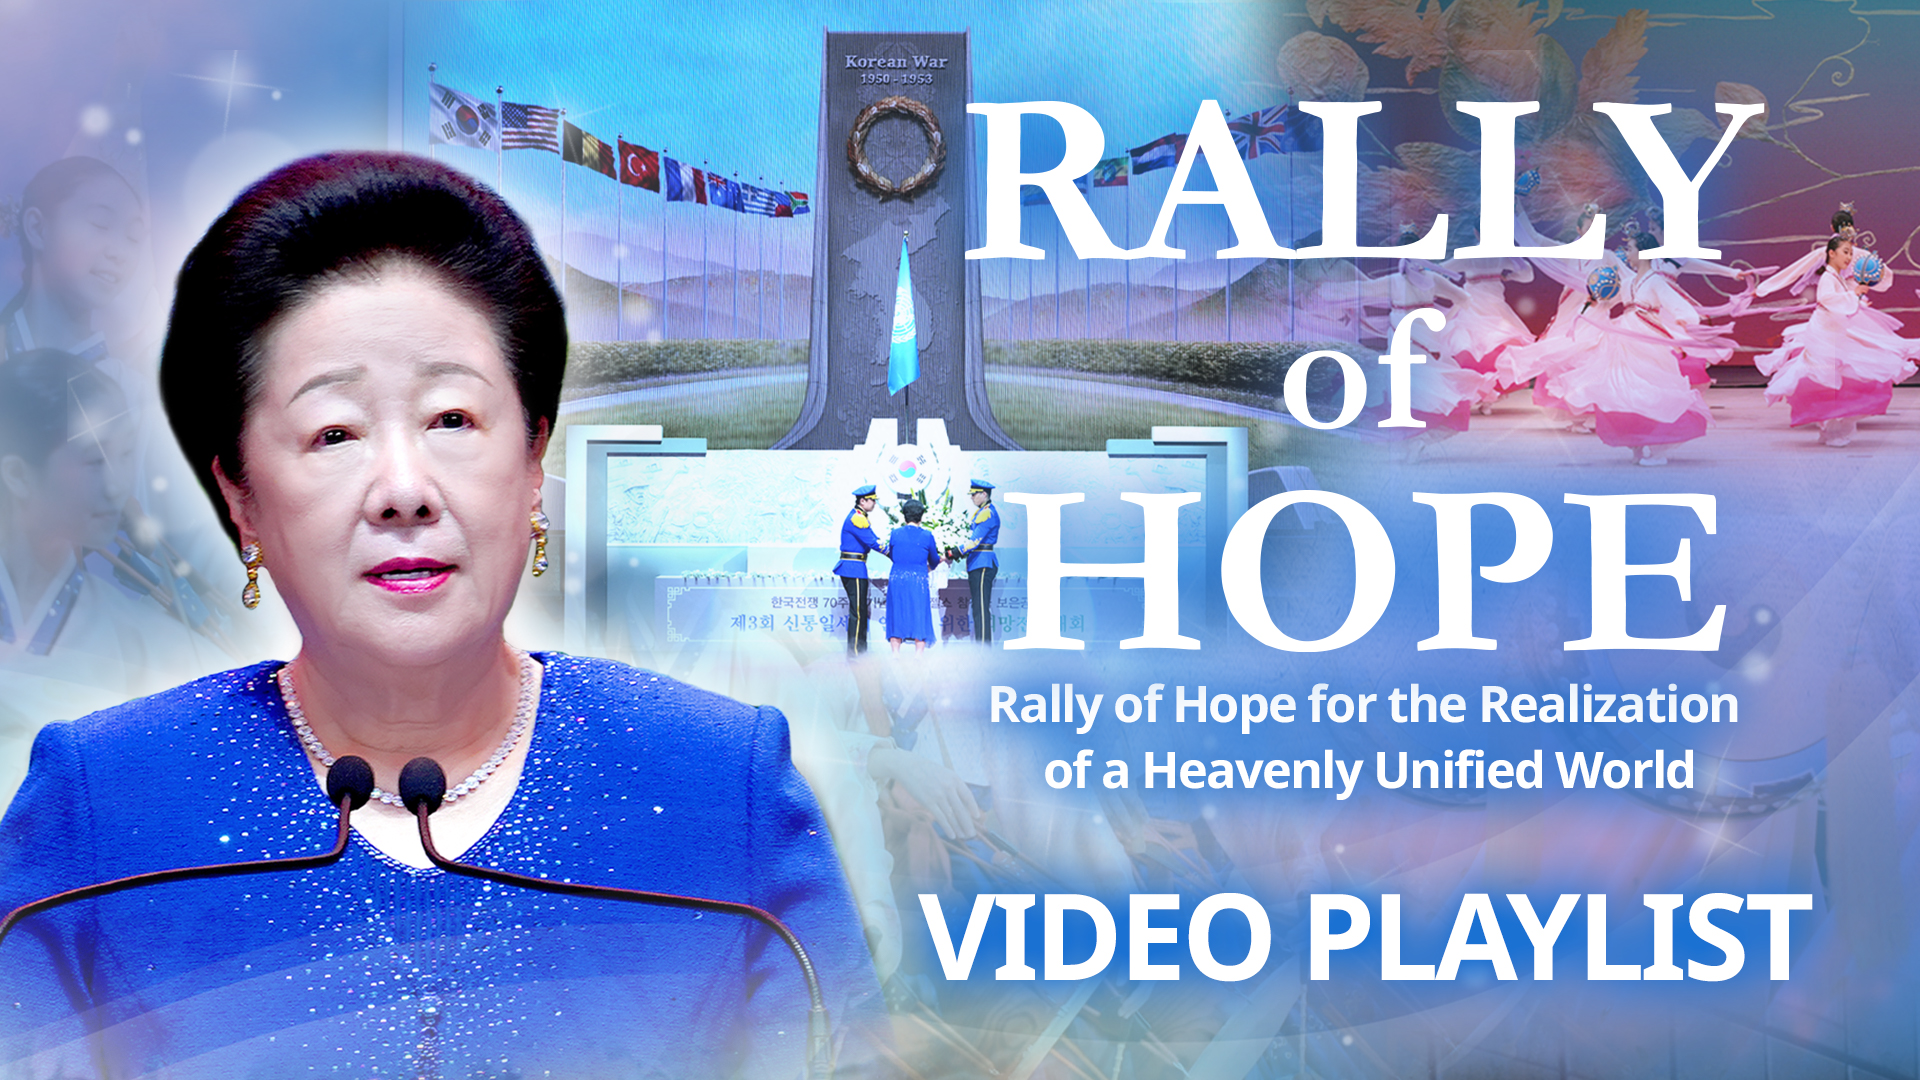 The 3rd One Million Rally of Hope for the Realization of a Heavenly Unified World